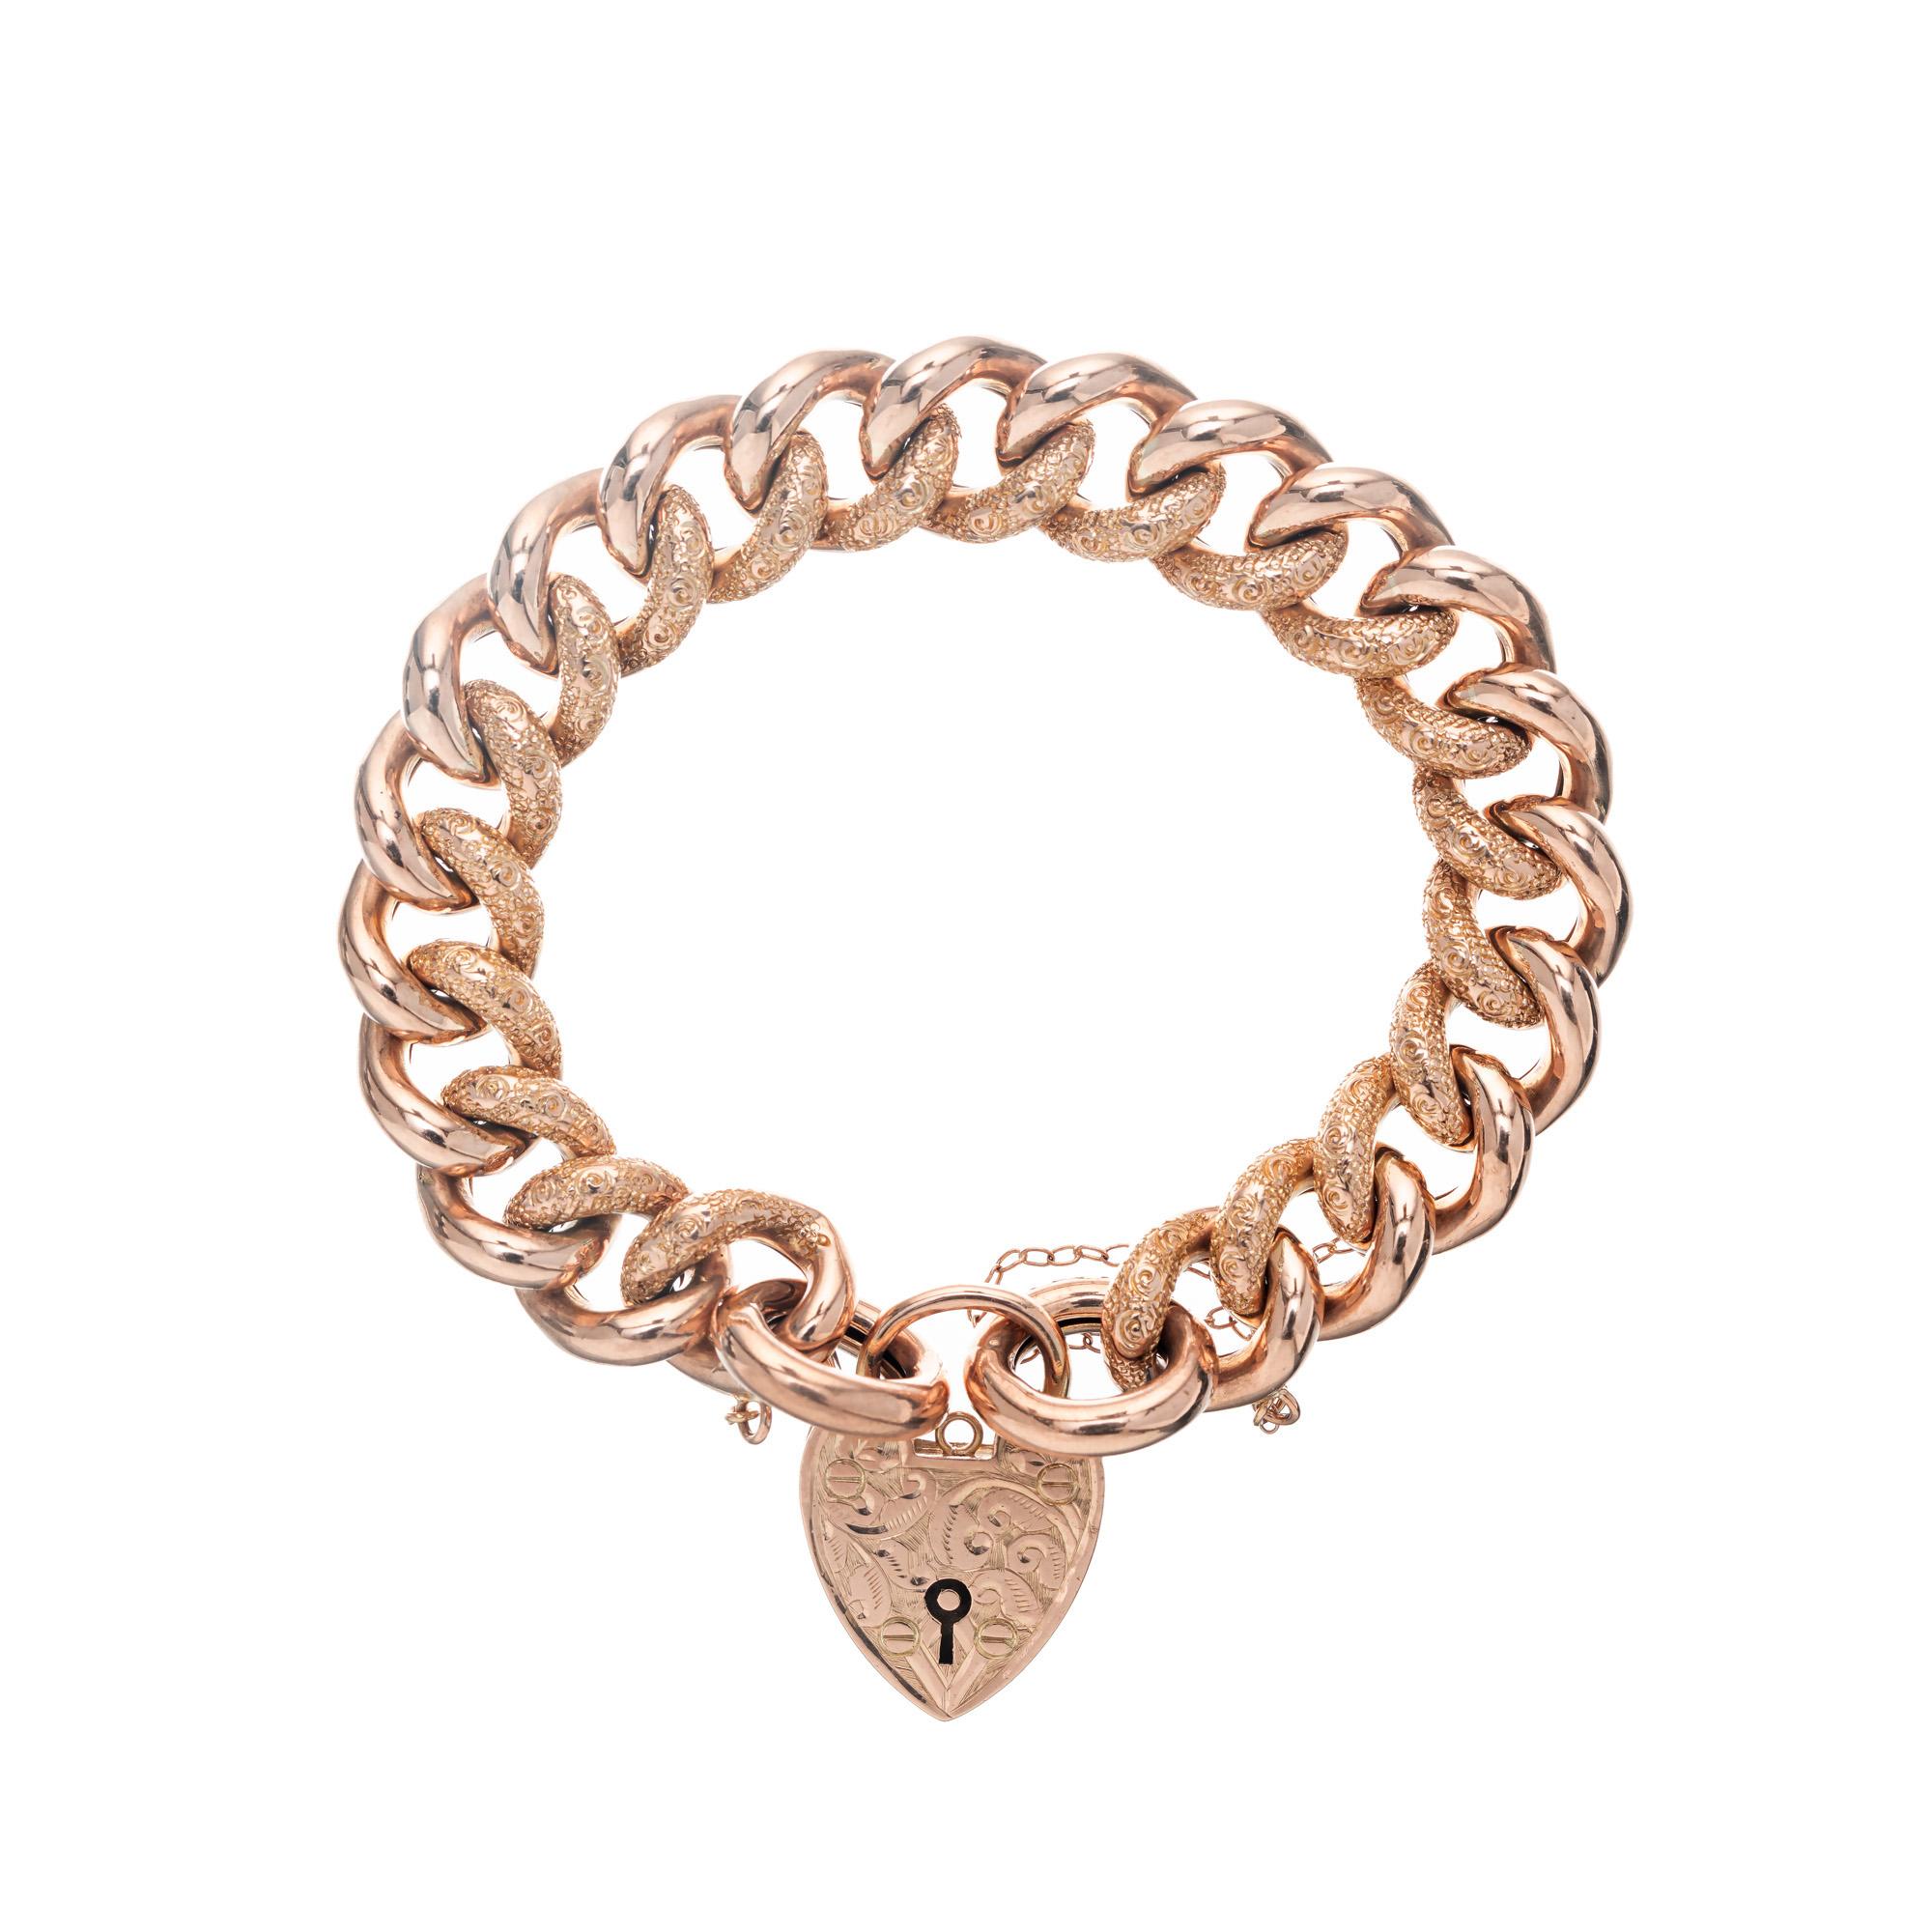 English puffed link hollow bracelet. Circa 1900's with hand engraving and a 9k rose gold heart lock catch. 7 inches long.

Tested: 9k rose gold
Width: 12.6mm
Depth or thickness: 6.4mm
Stamped: 9k
Weight: 29.6 grams


